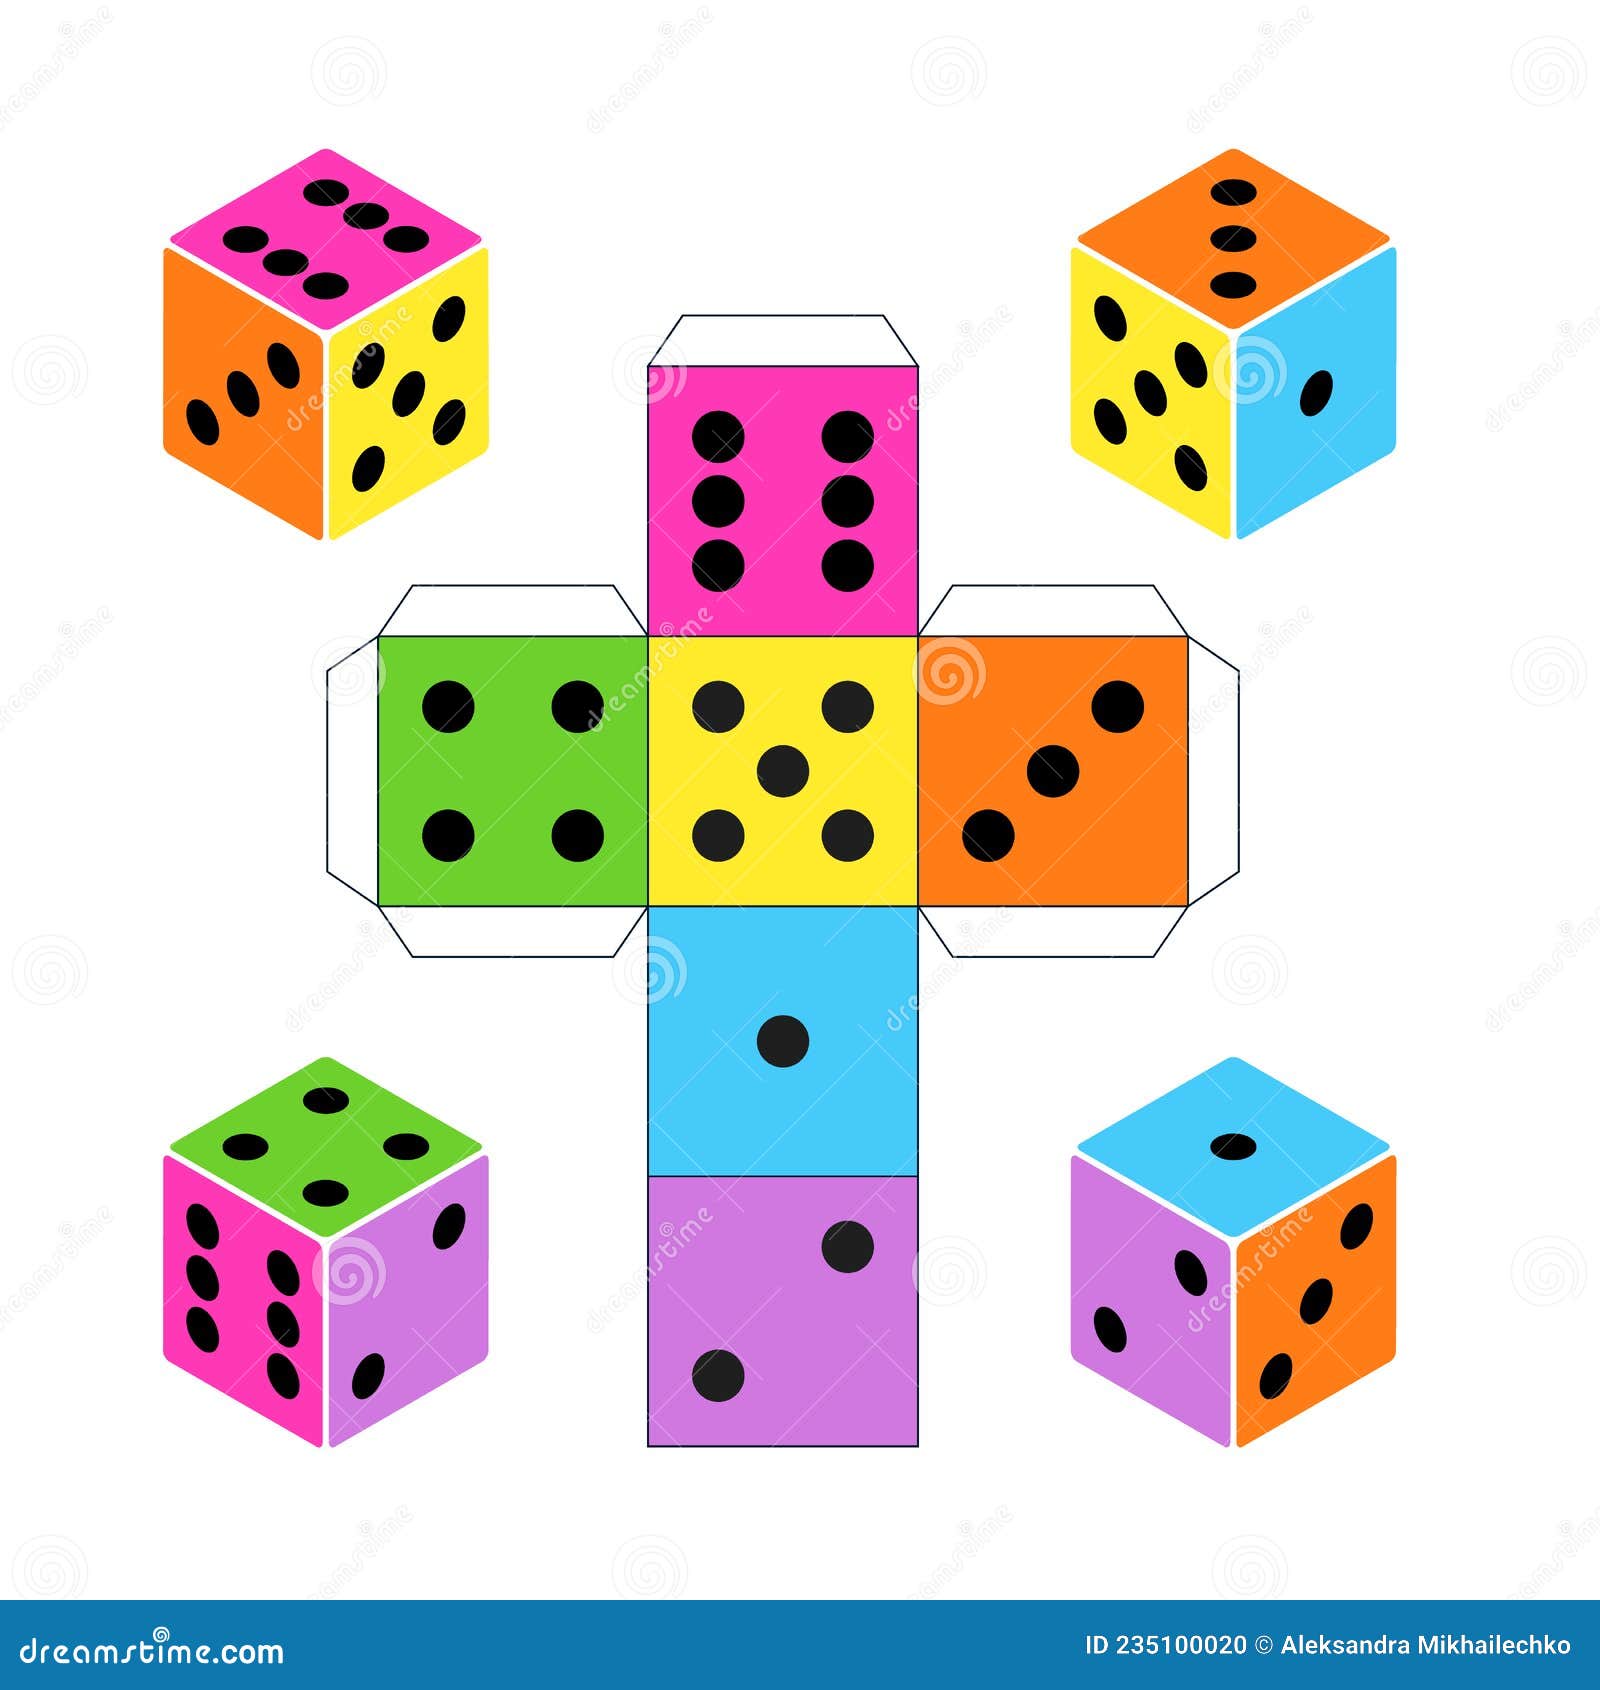 paper dice template stock illustrations 249 paper dice template stock illustrations vectors clipart dreamstime